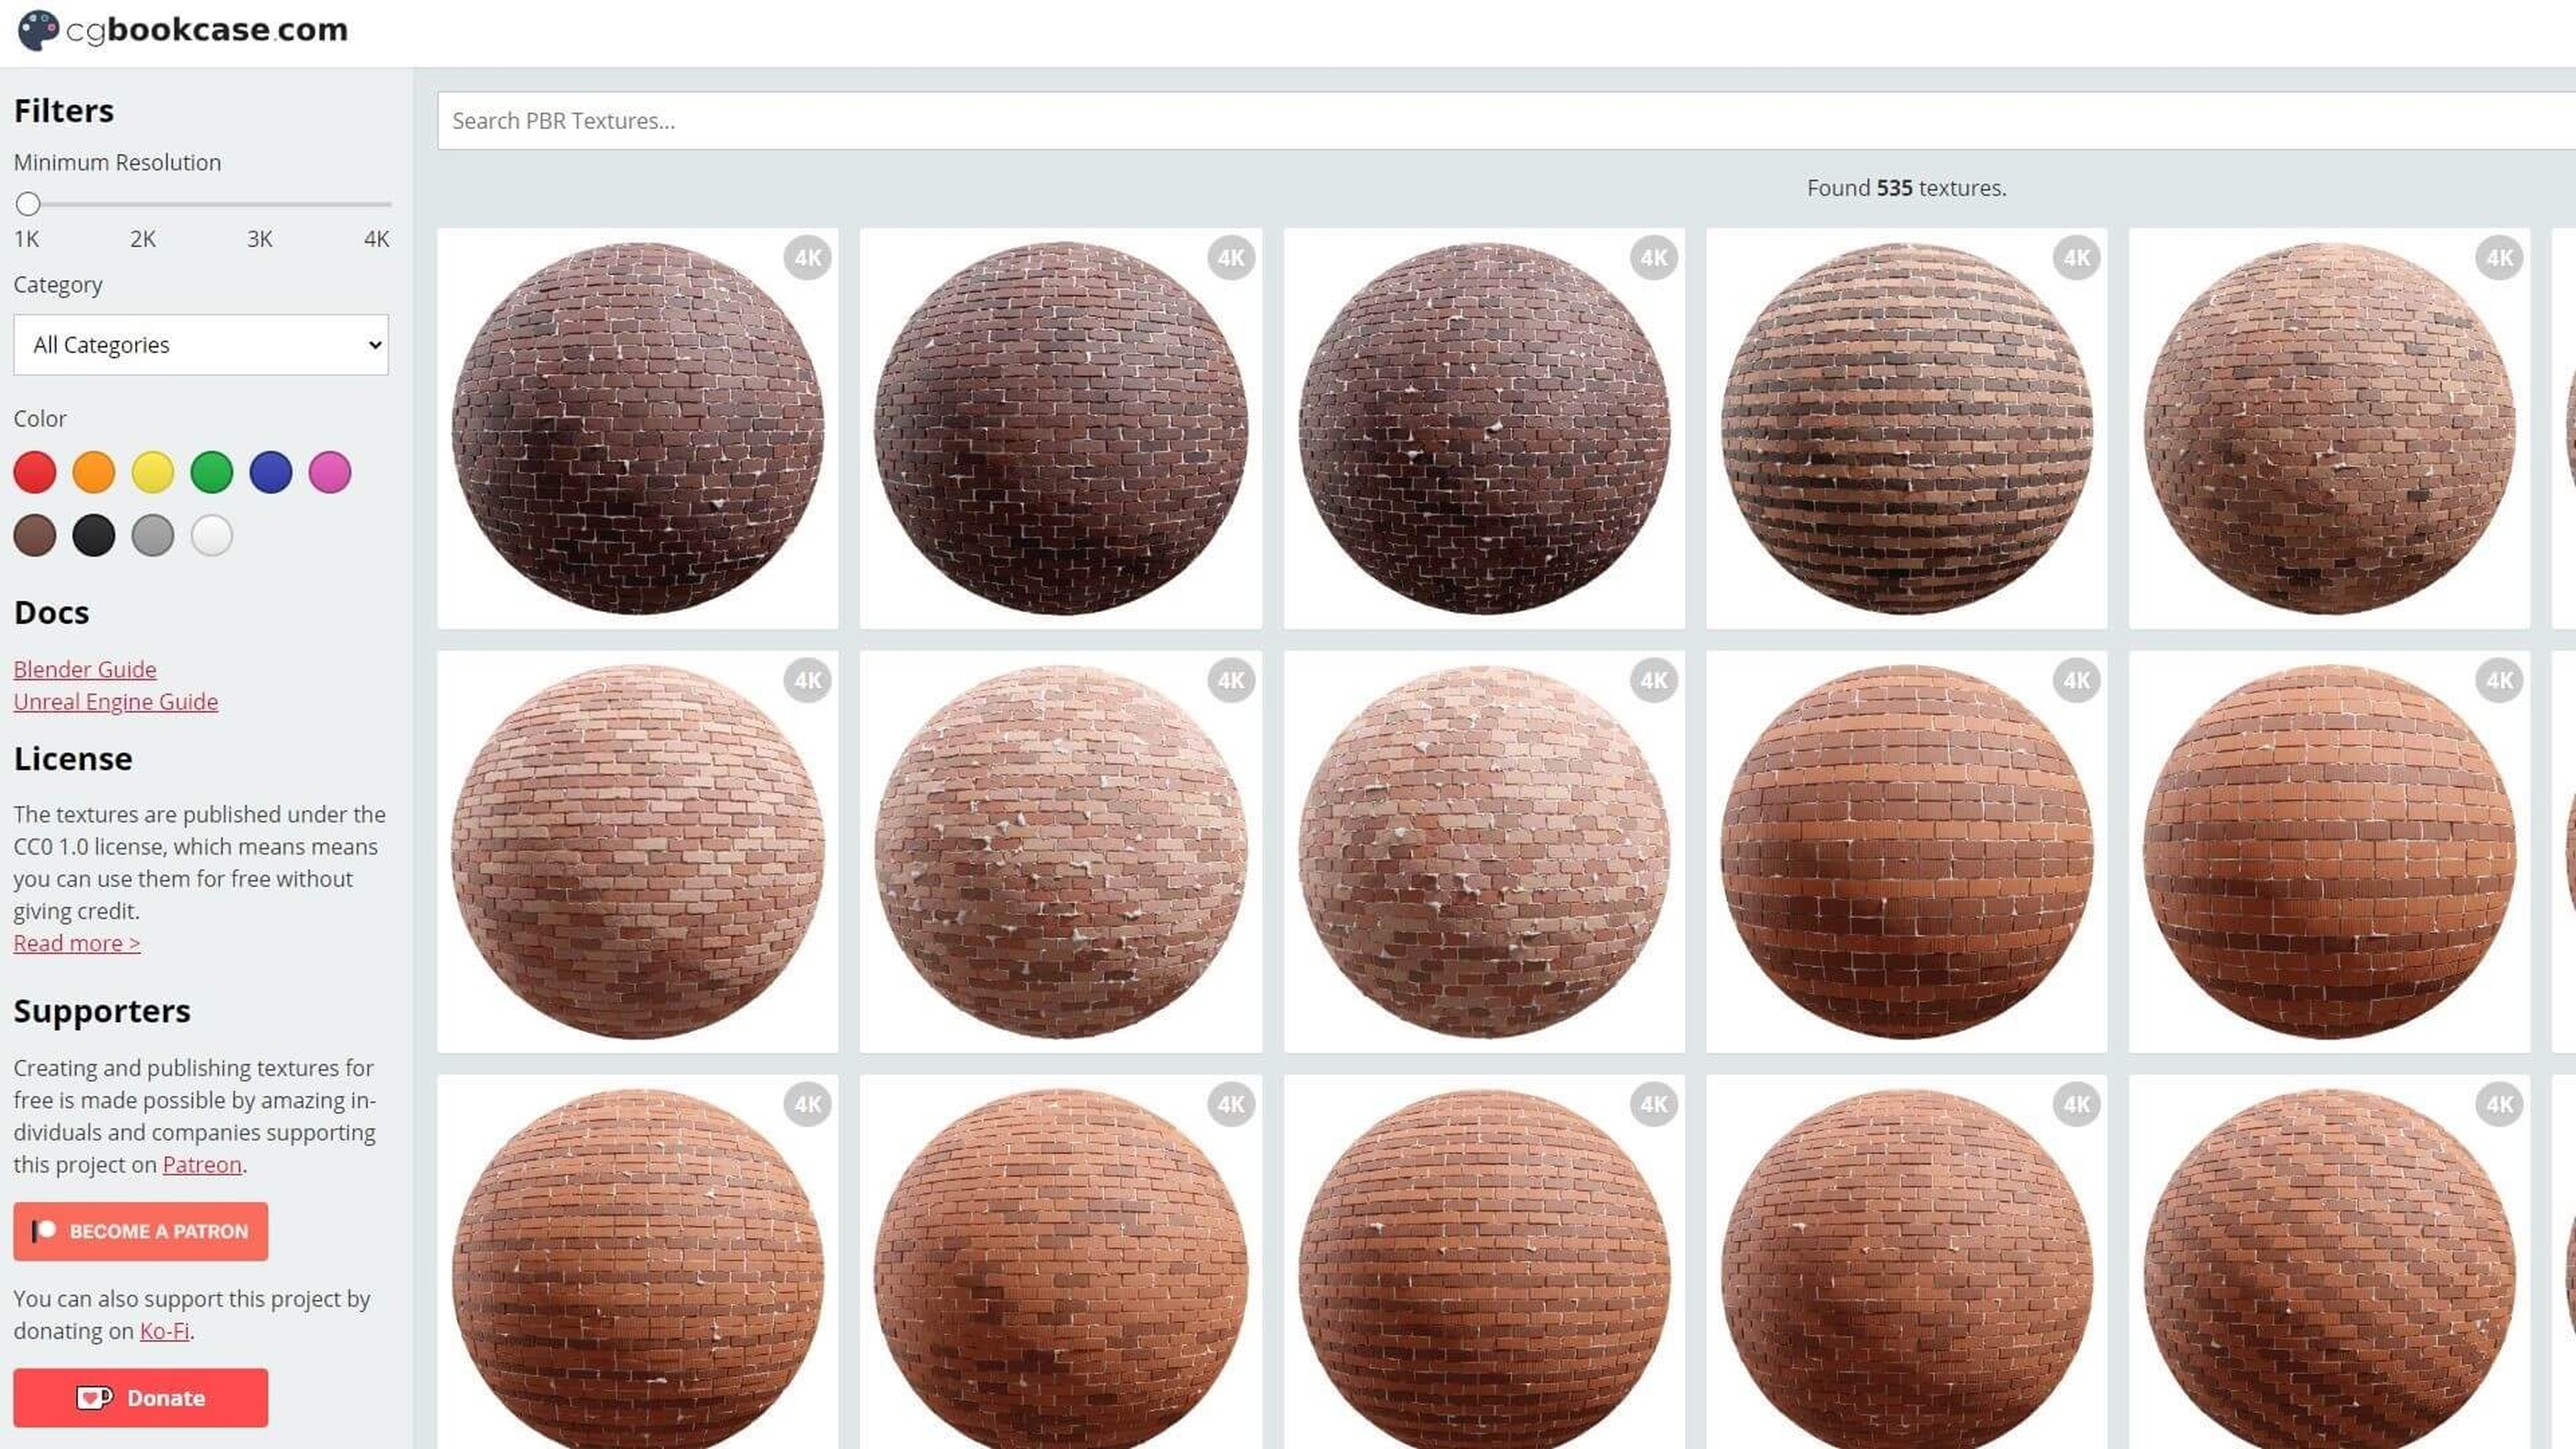 a screenshot taken from the website cg bookcase showing spheres with different textures